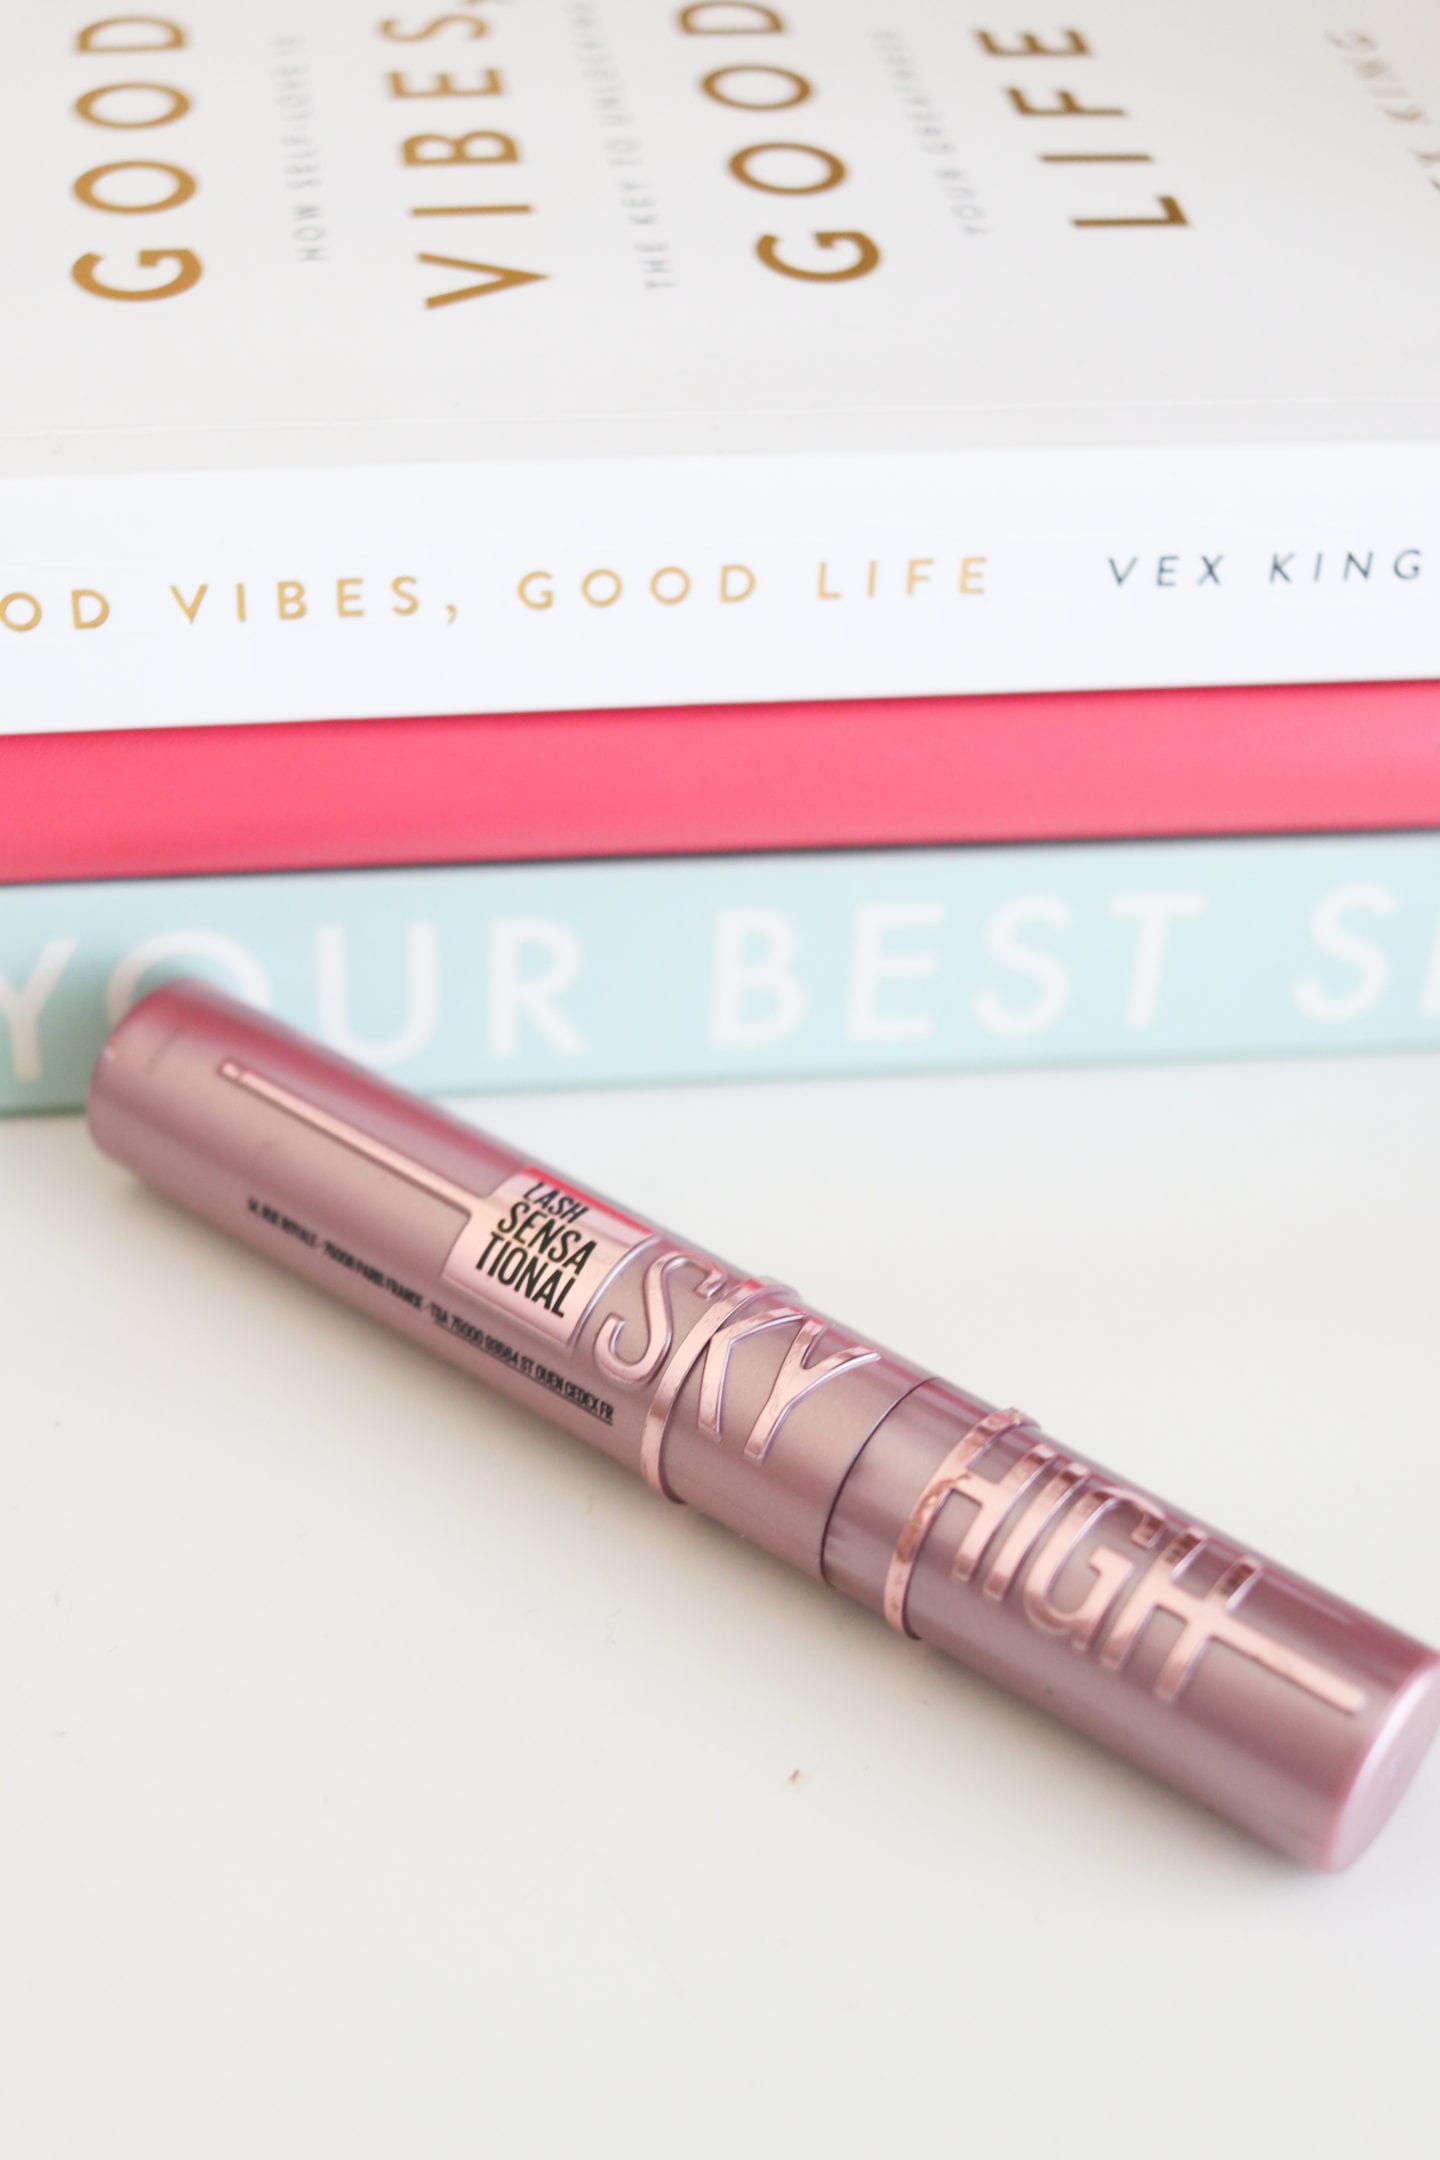 Maybelline Lash Sky High Mascara Review